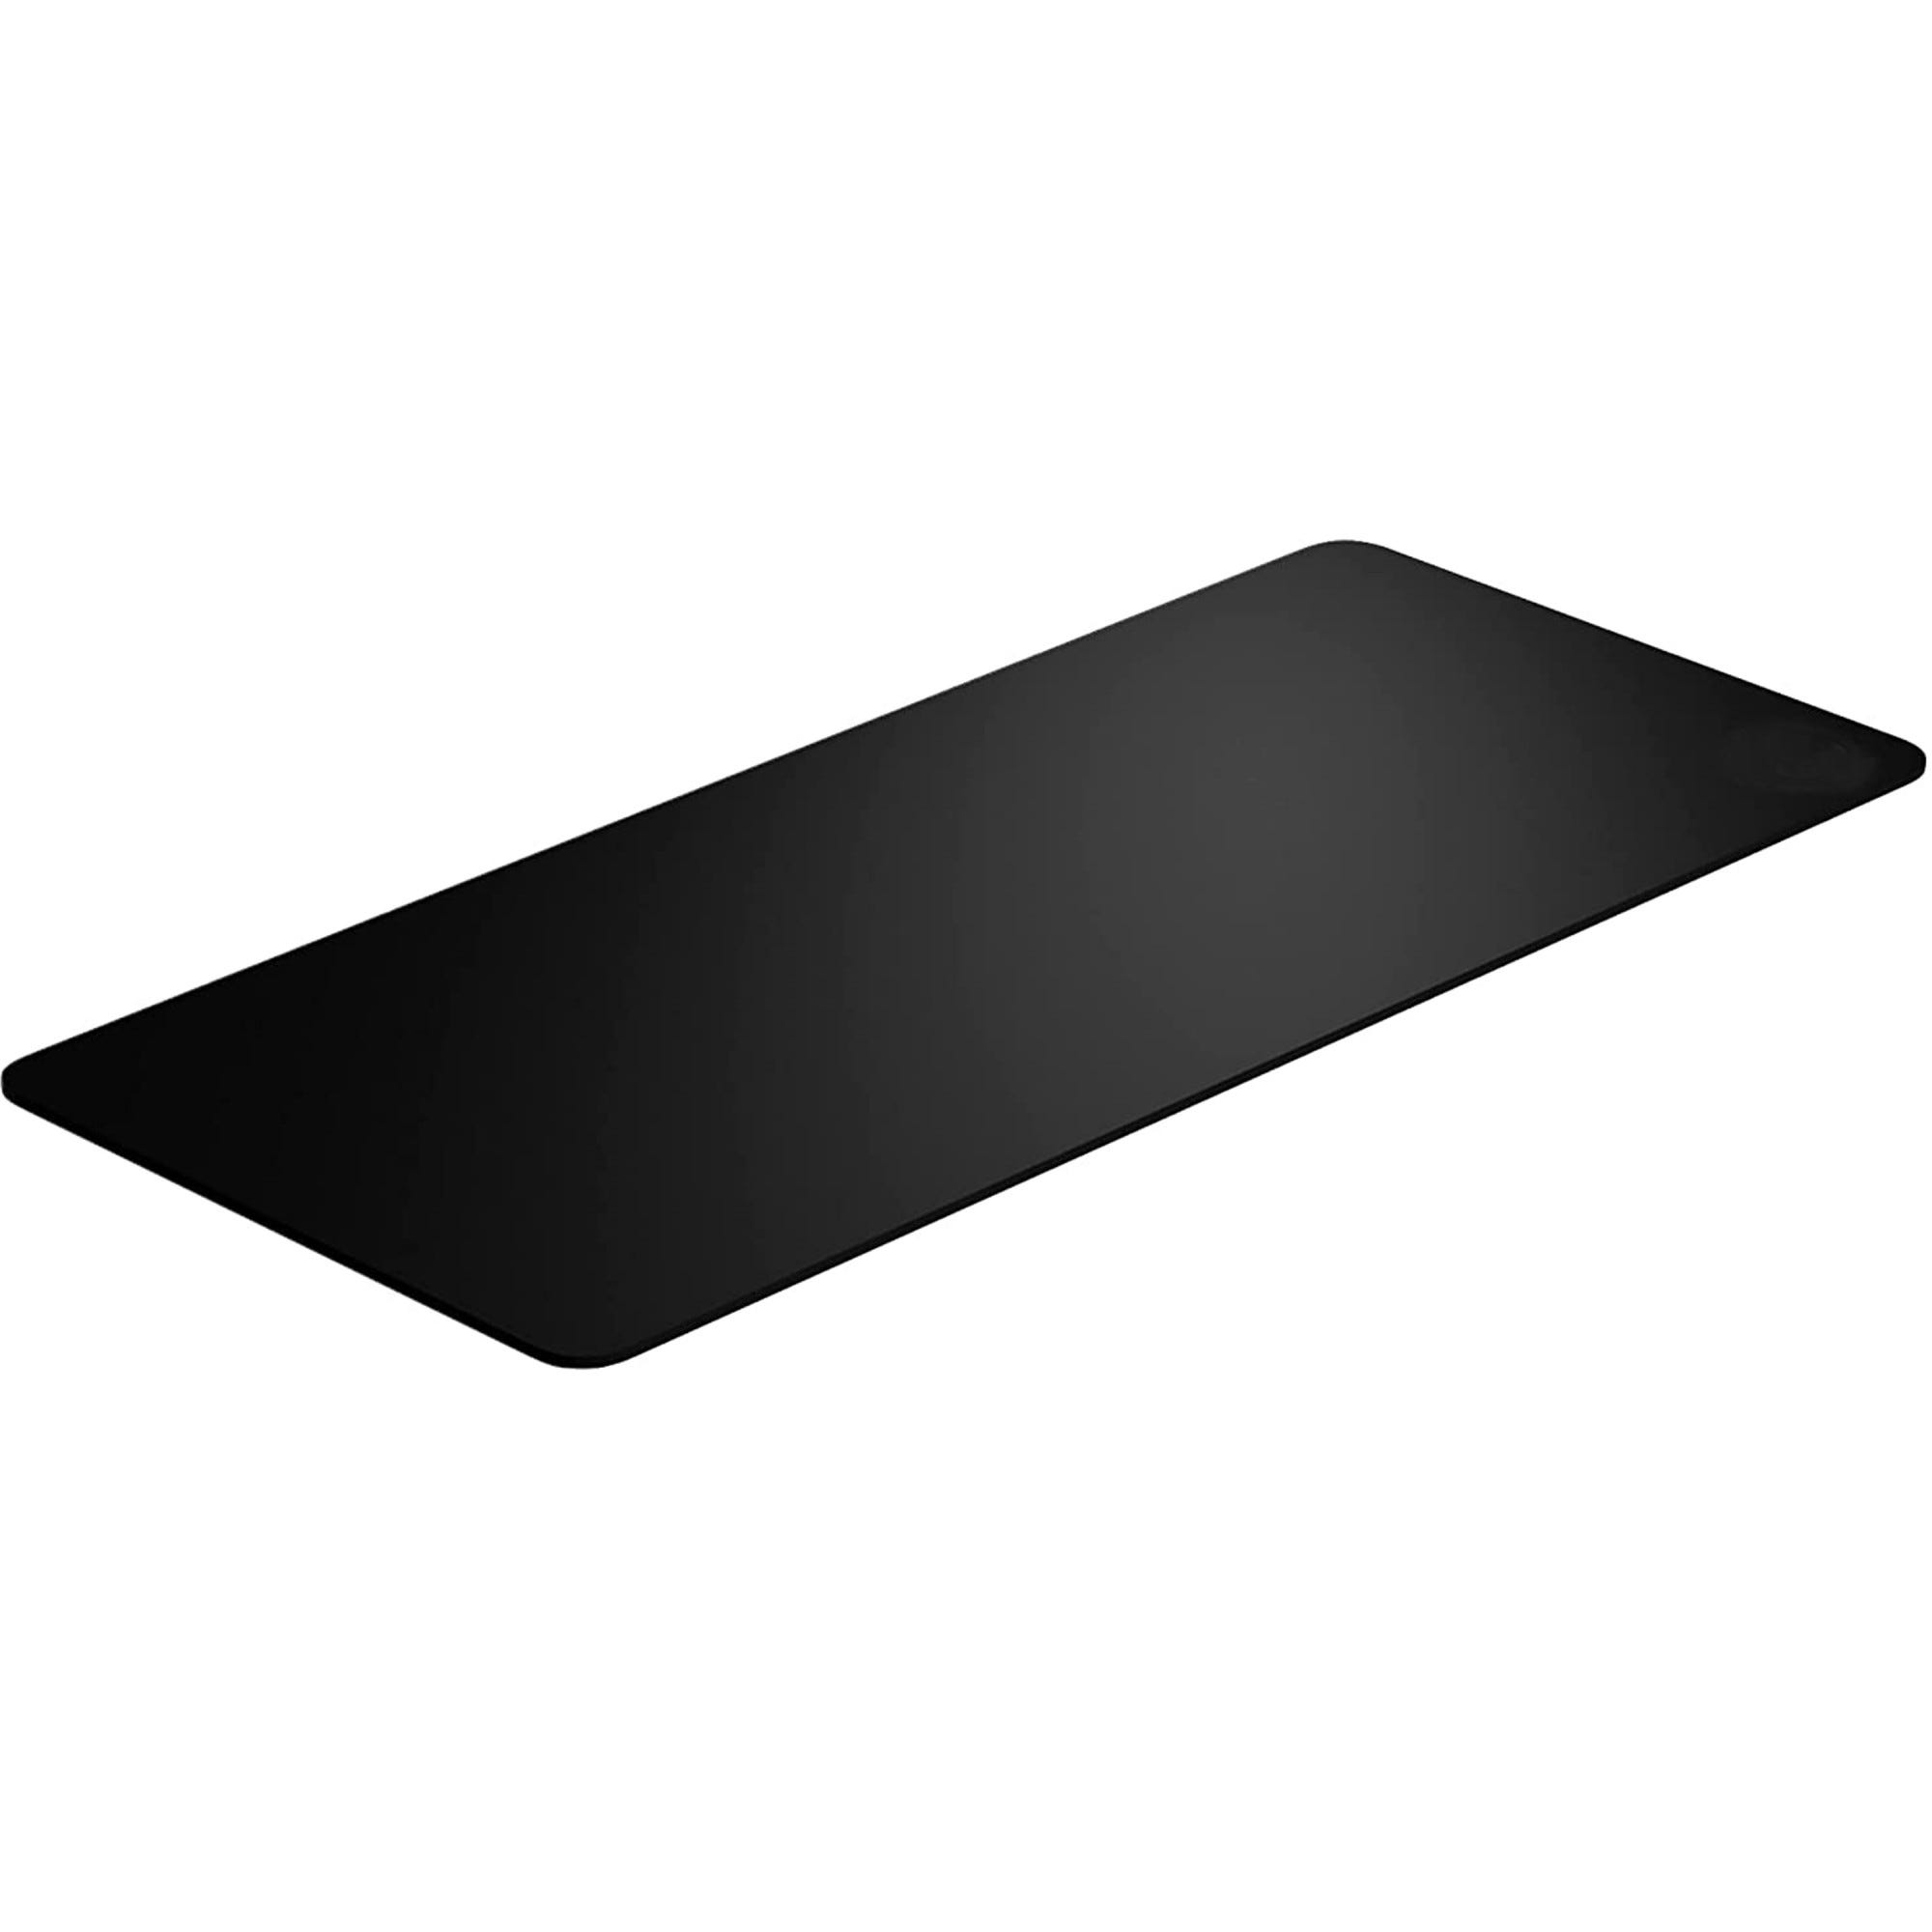 TAPPETINO PER MOUSE XXL PAD MOUSEPAD GAMING EXTRA LARGE TAPPETO